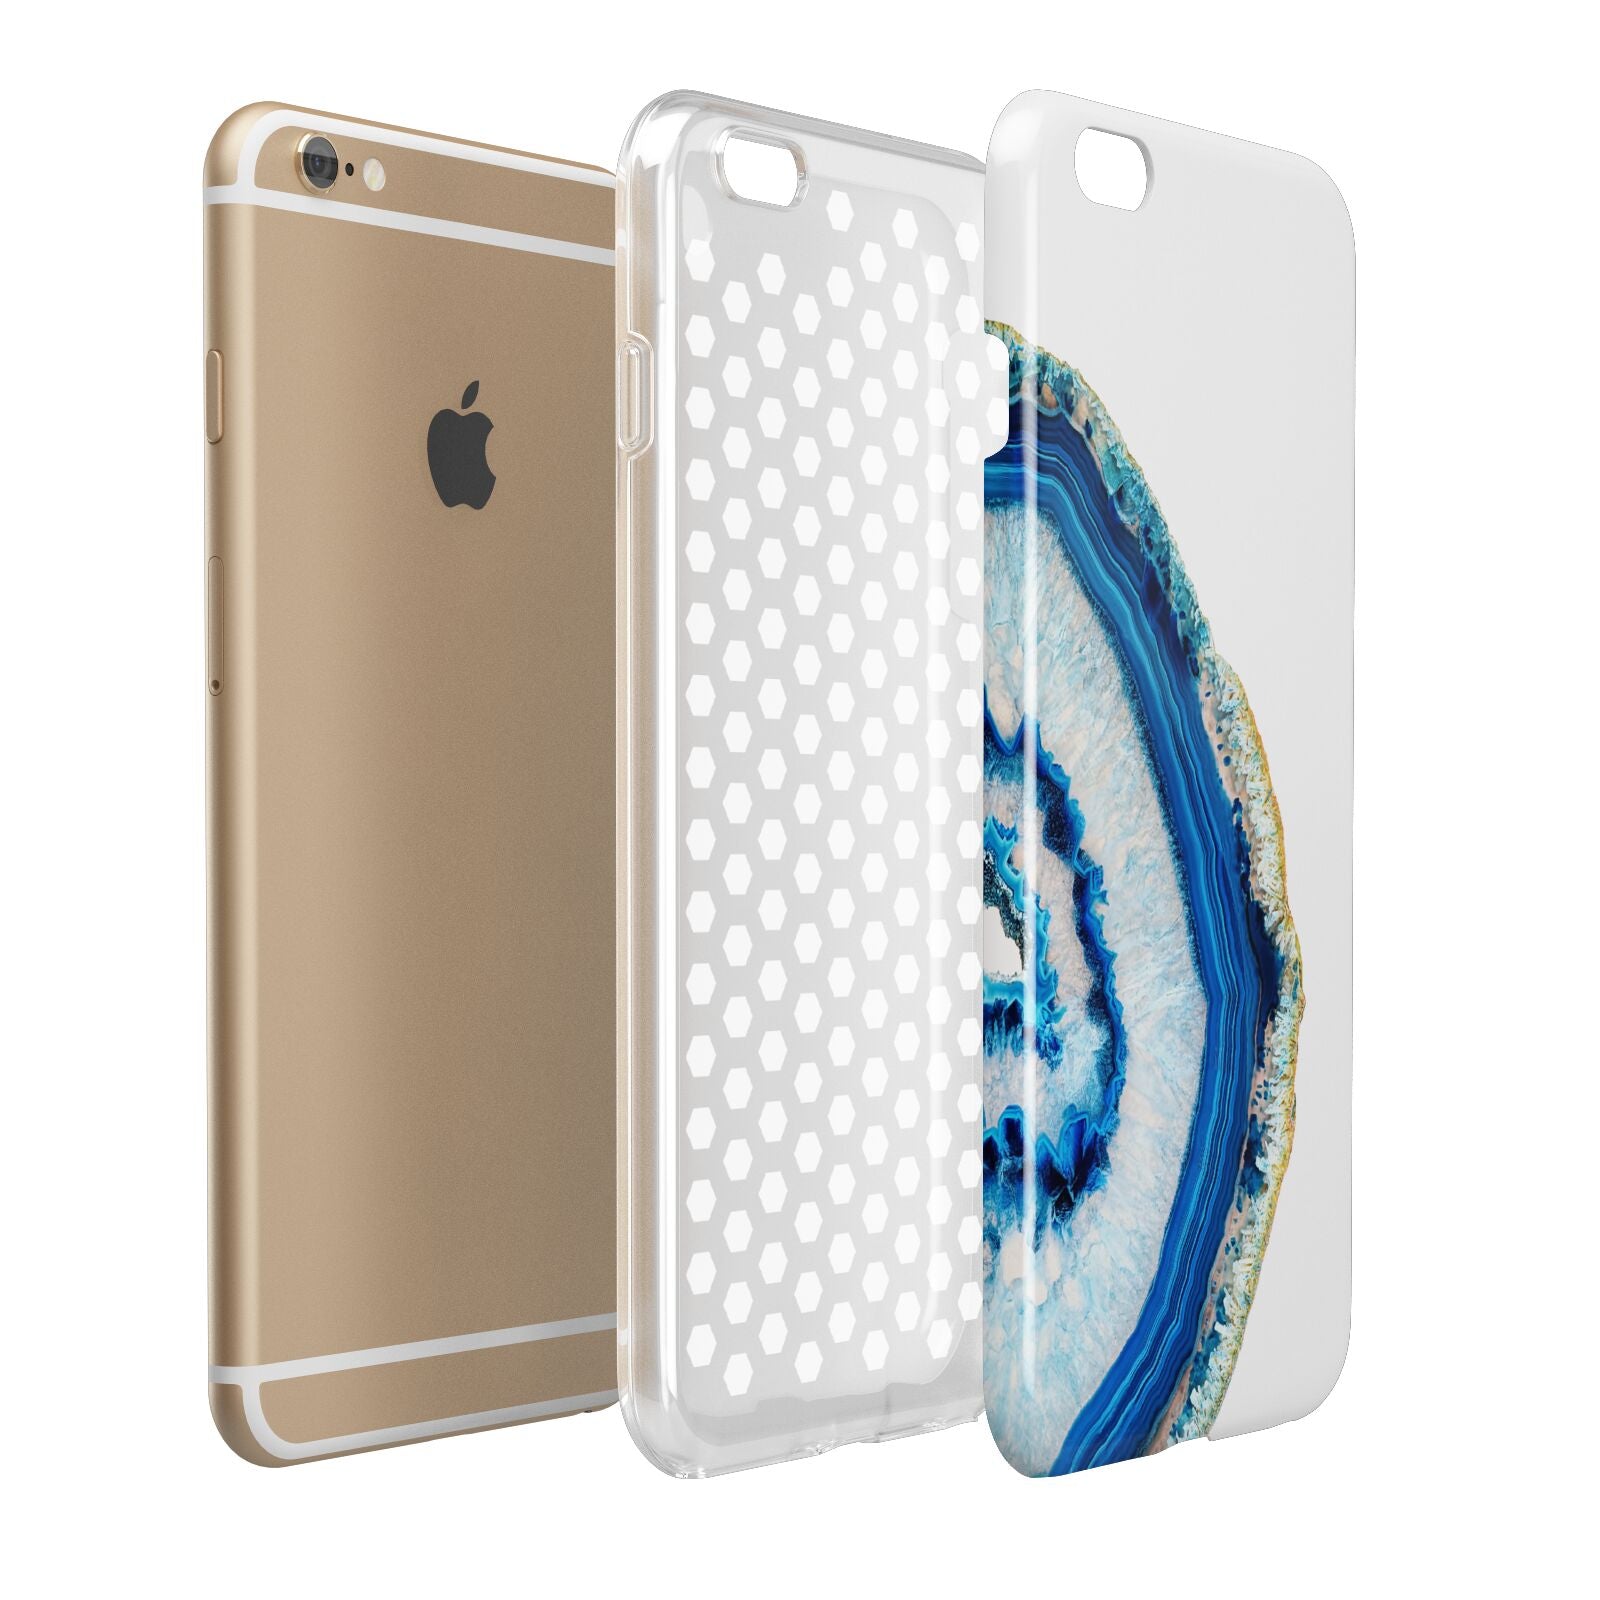 Agate Dark Blue and Turquoise Apple iPhone 6 Plus 3D Tough Case Expand Detail Image